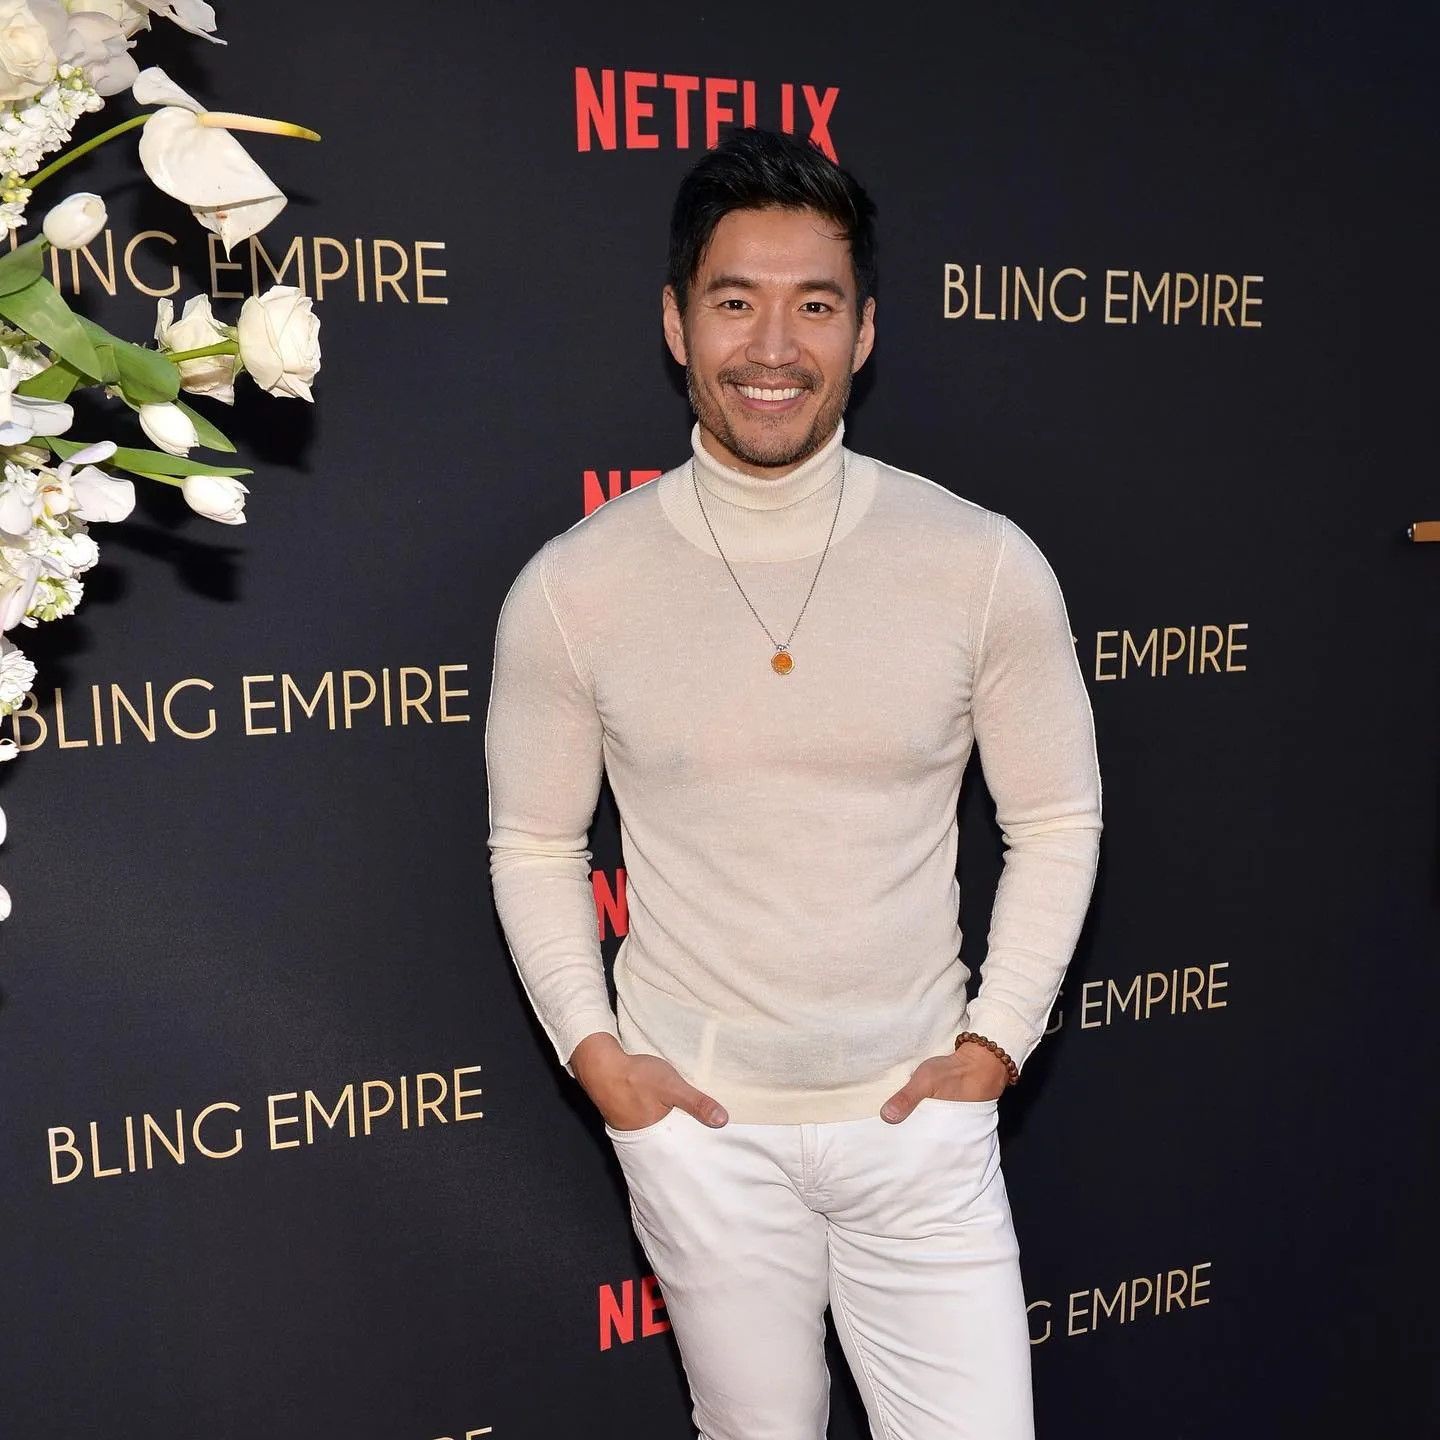 Meet the 7 crazy rich Asians from Bling Empire: New York